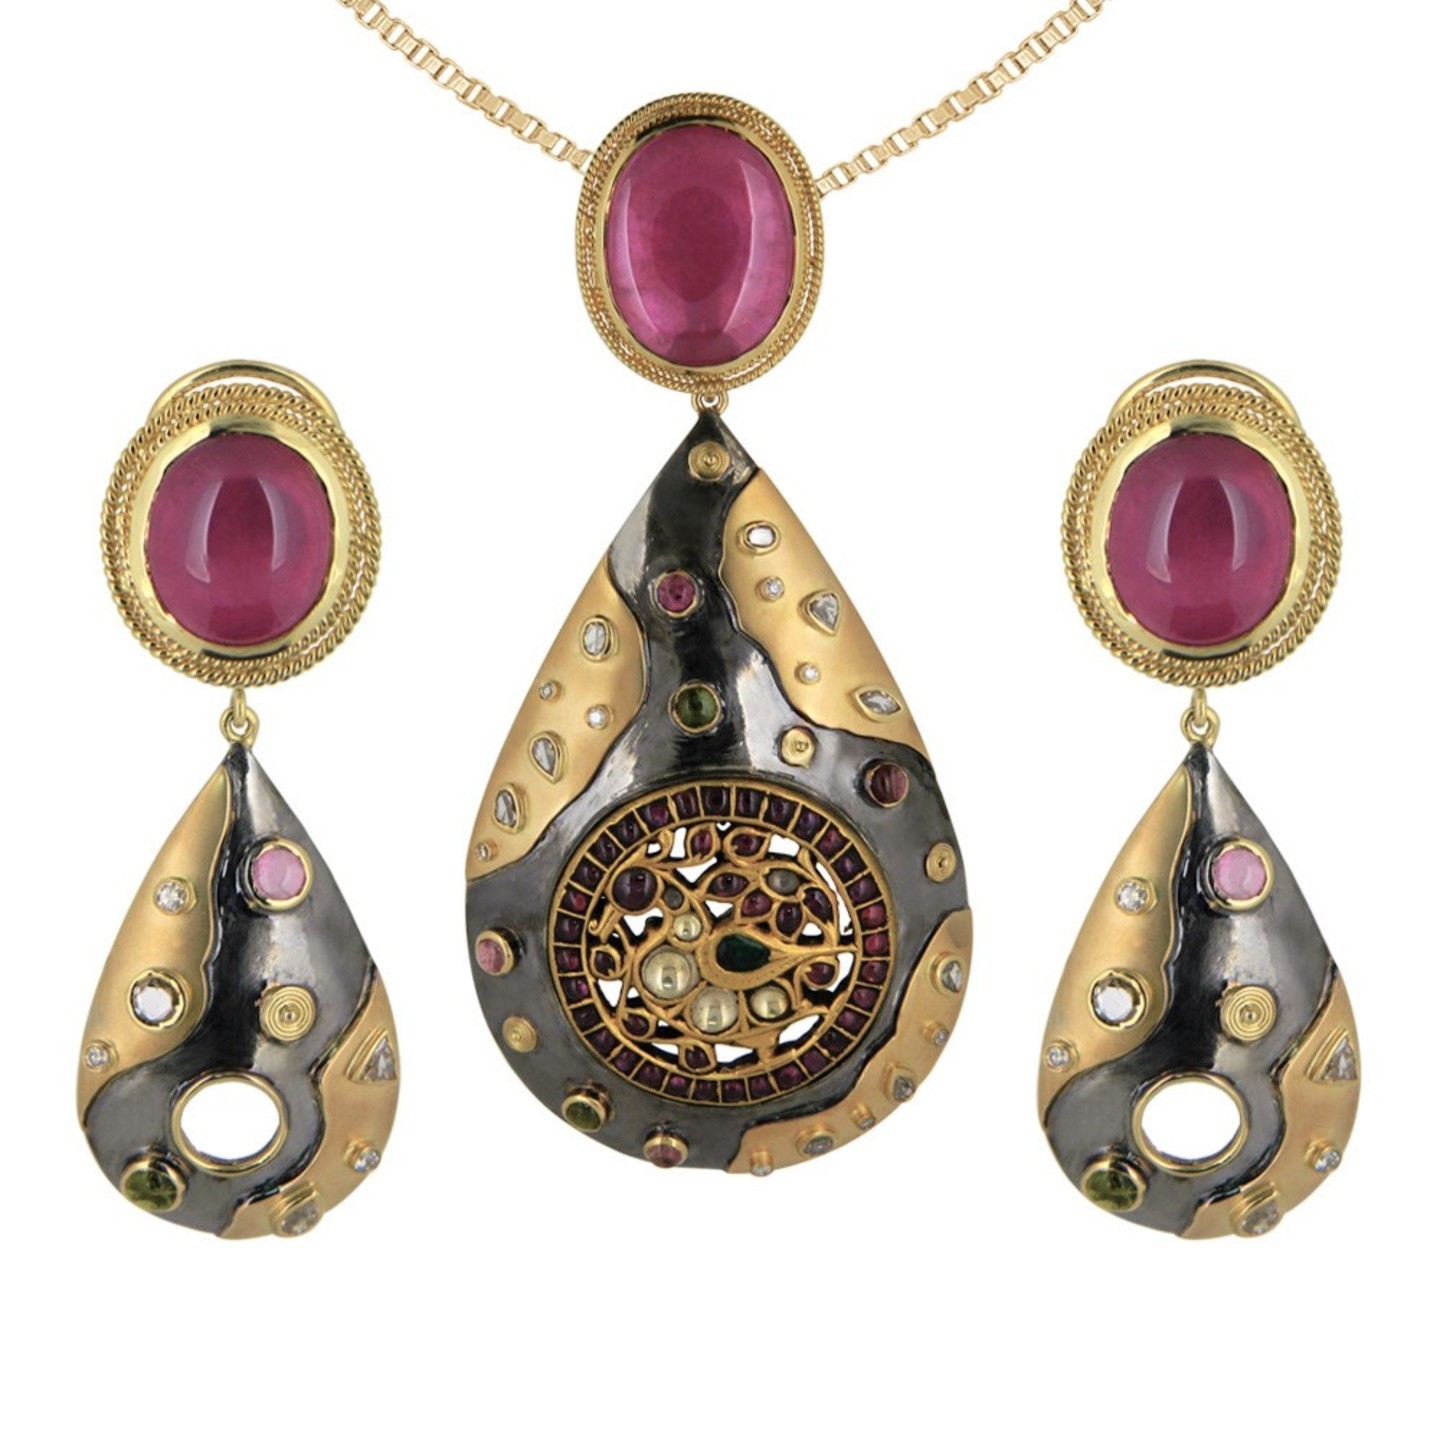 A prominent bold textured Gold and Silver pendant set, studded with colourful gems